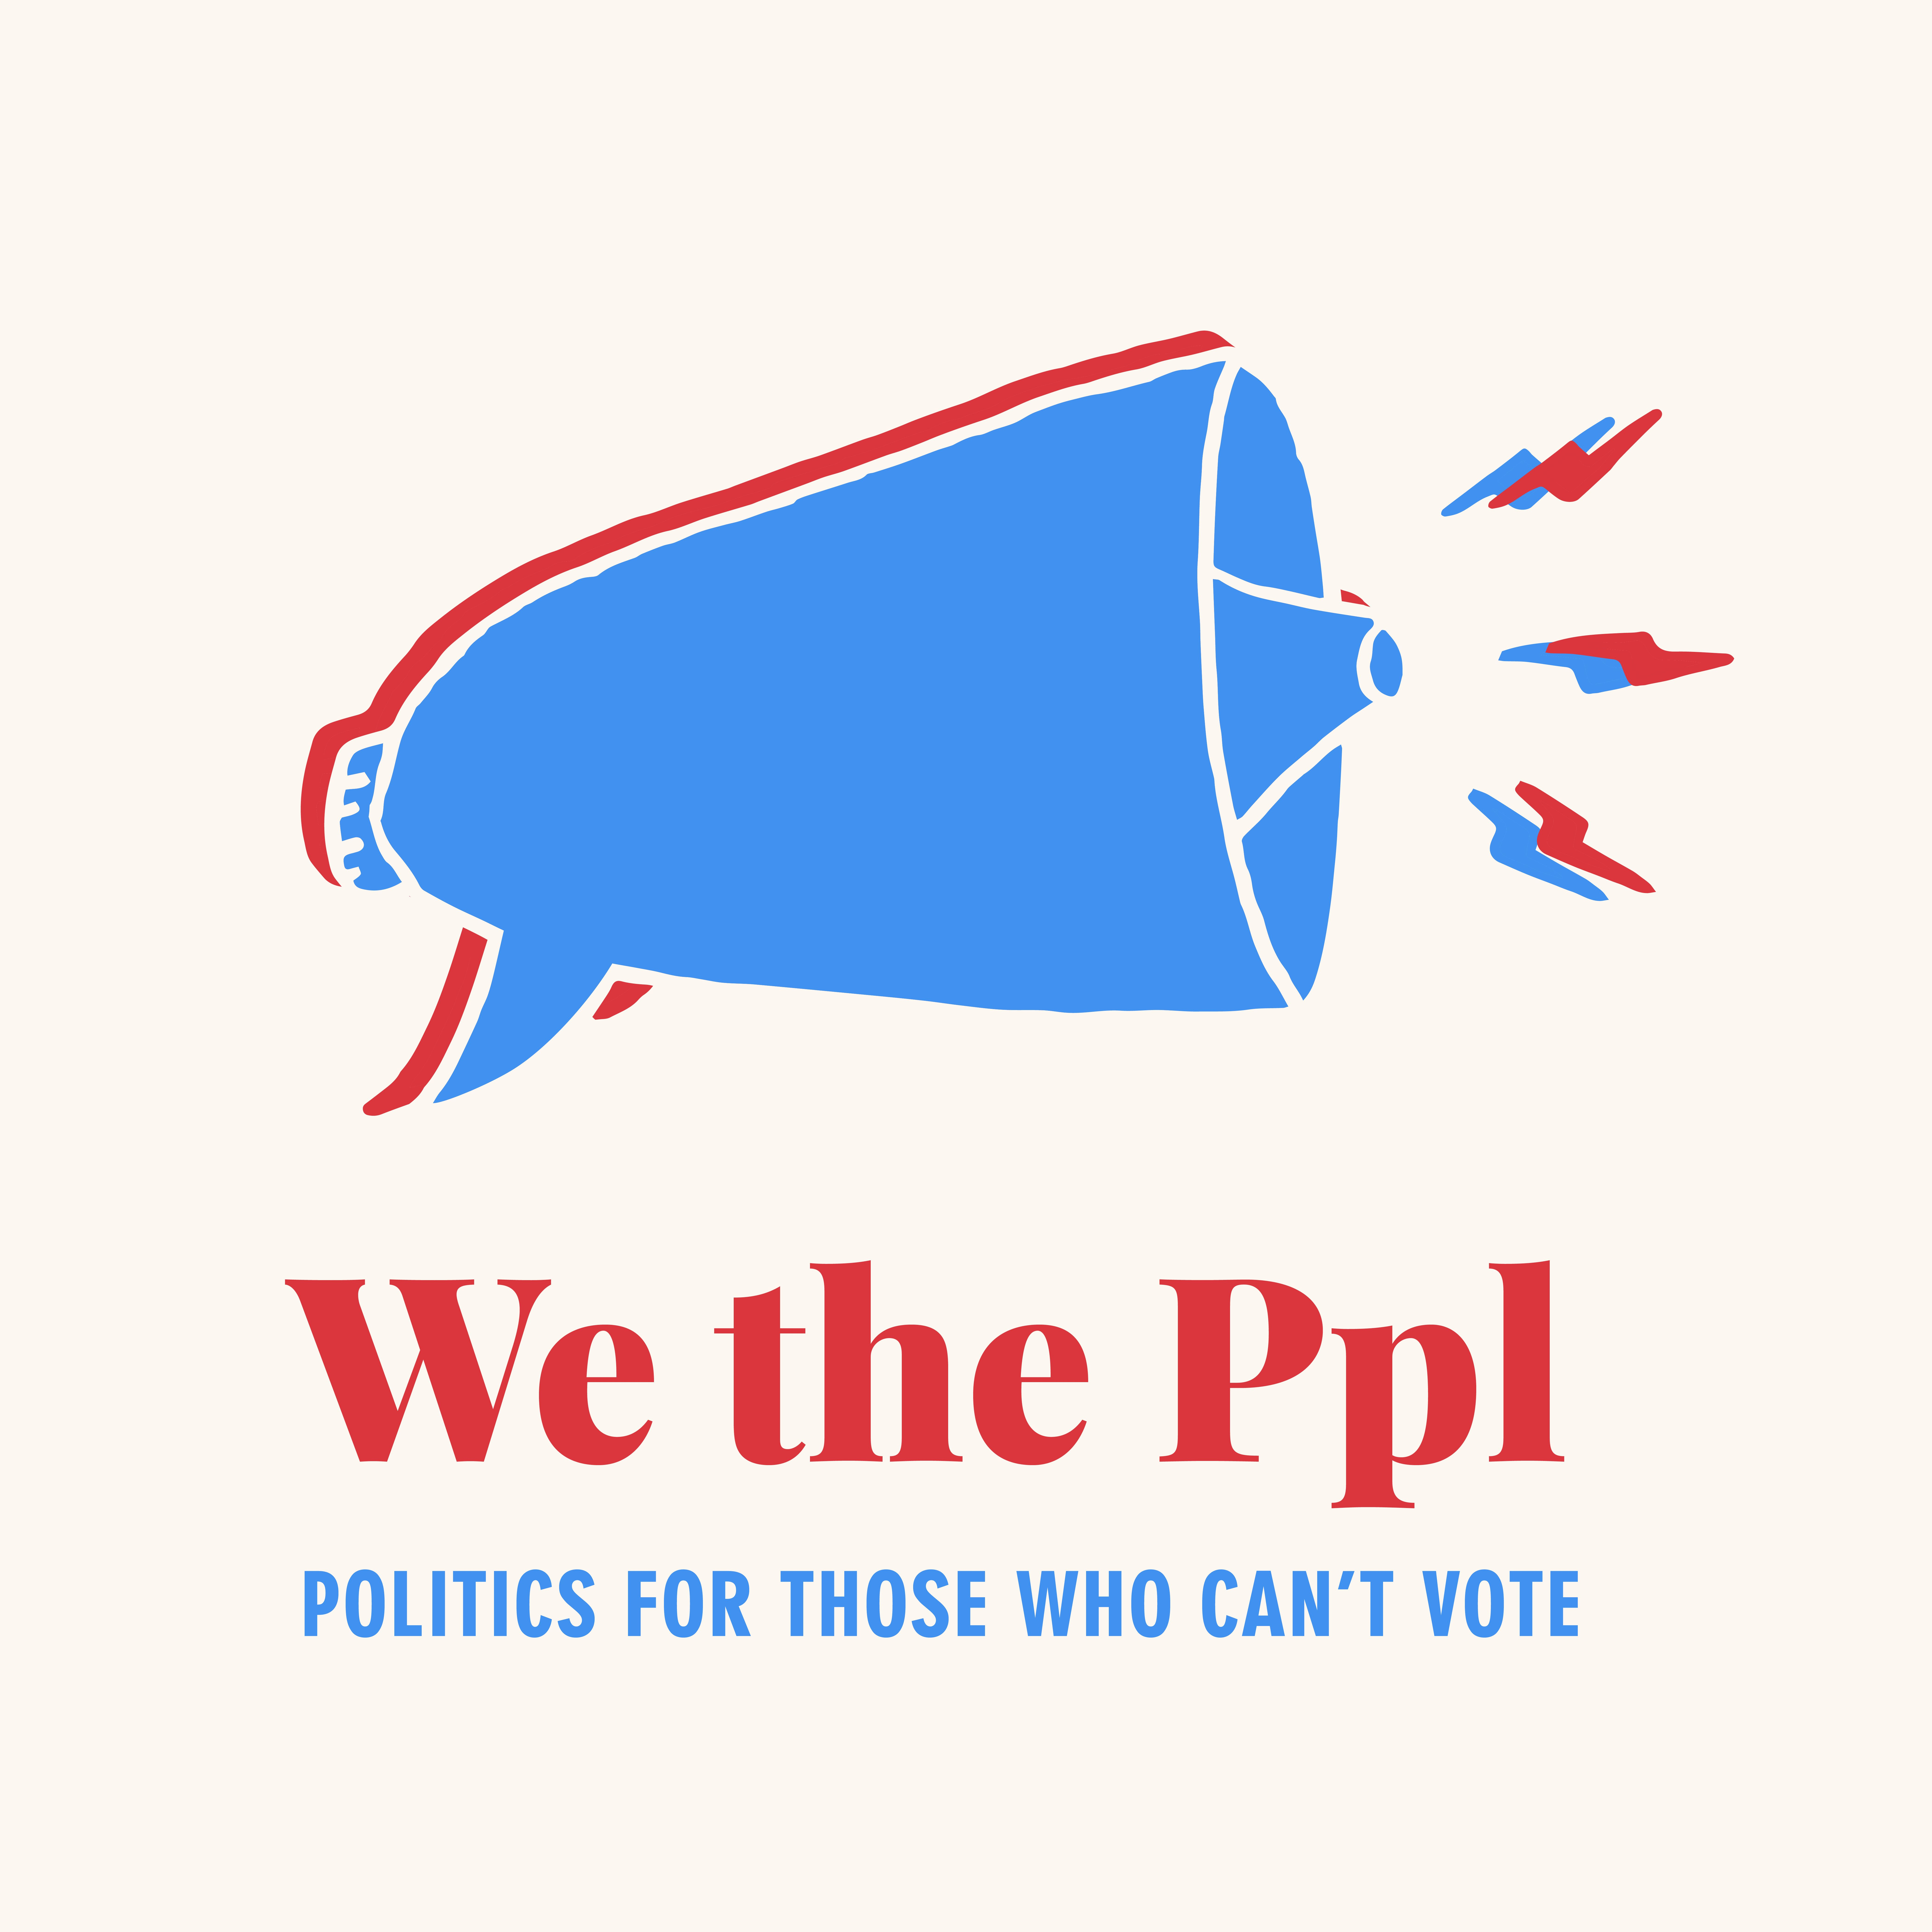 We the Ppl: Politics for Those Who Can't Vote